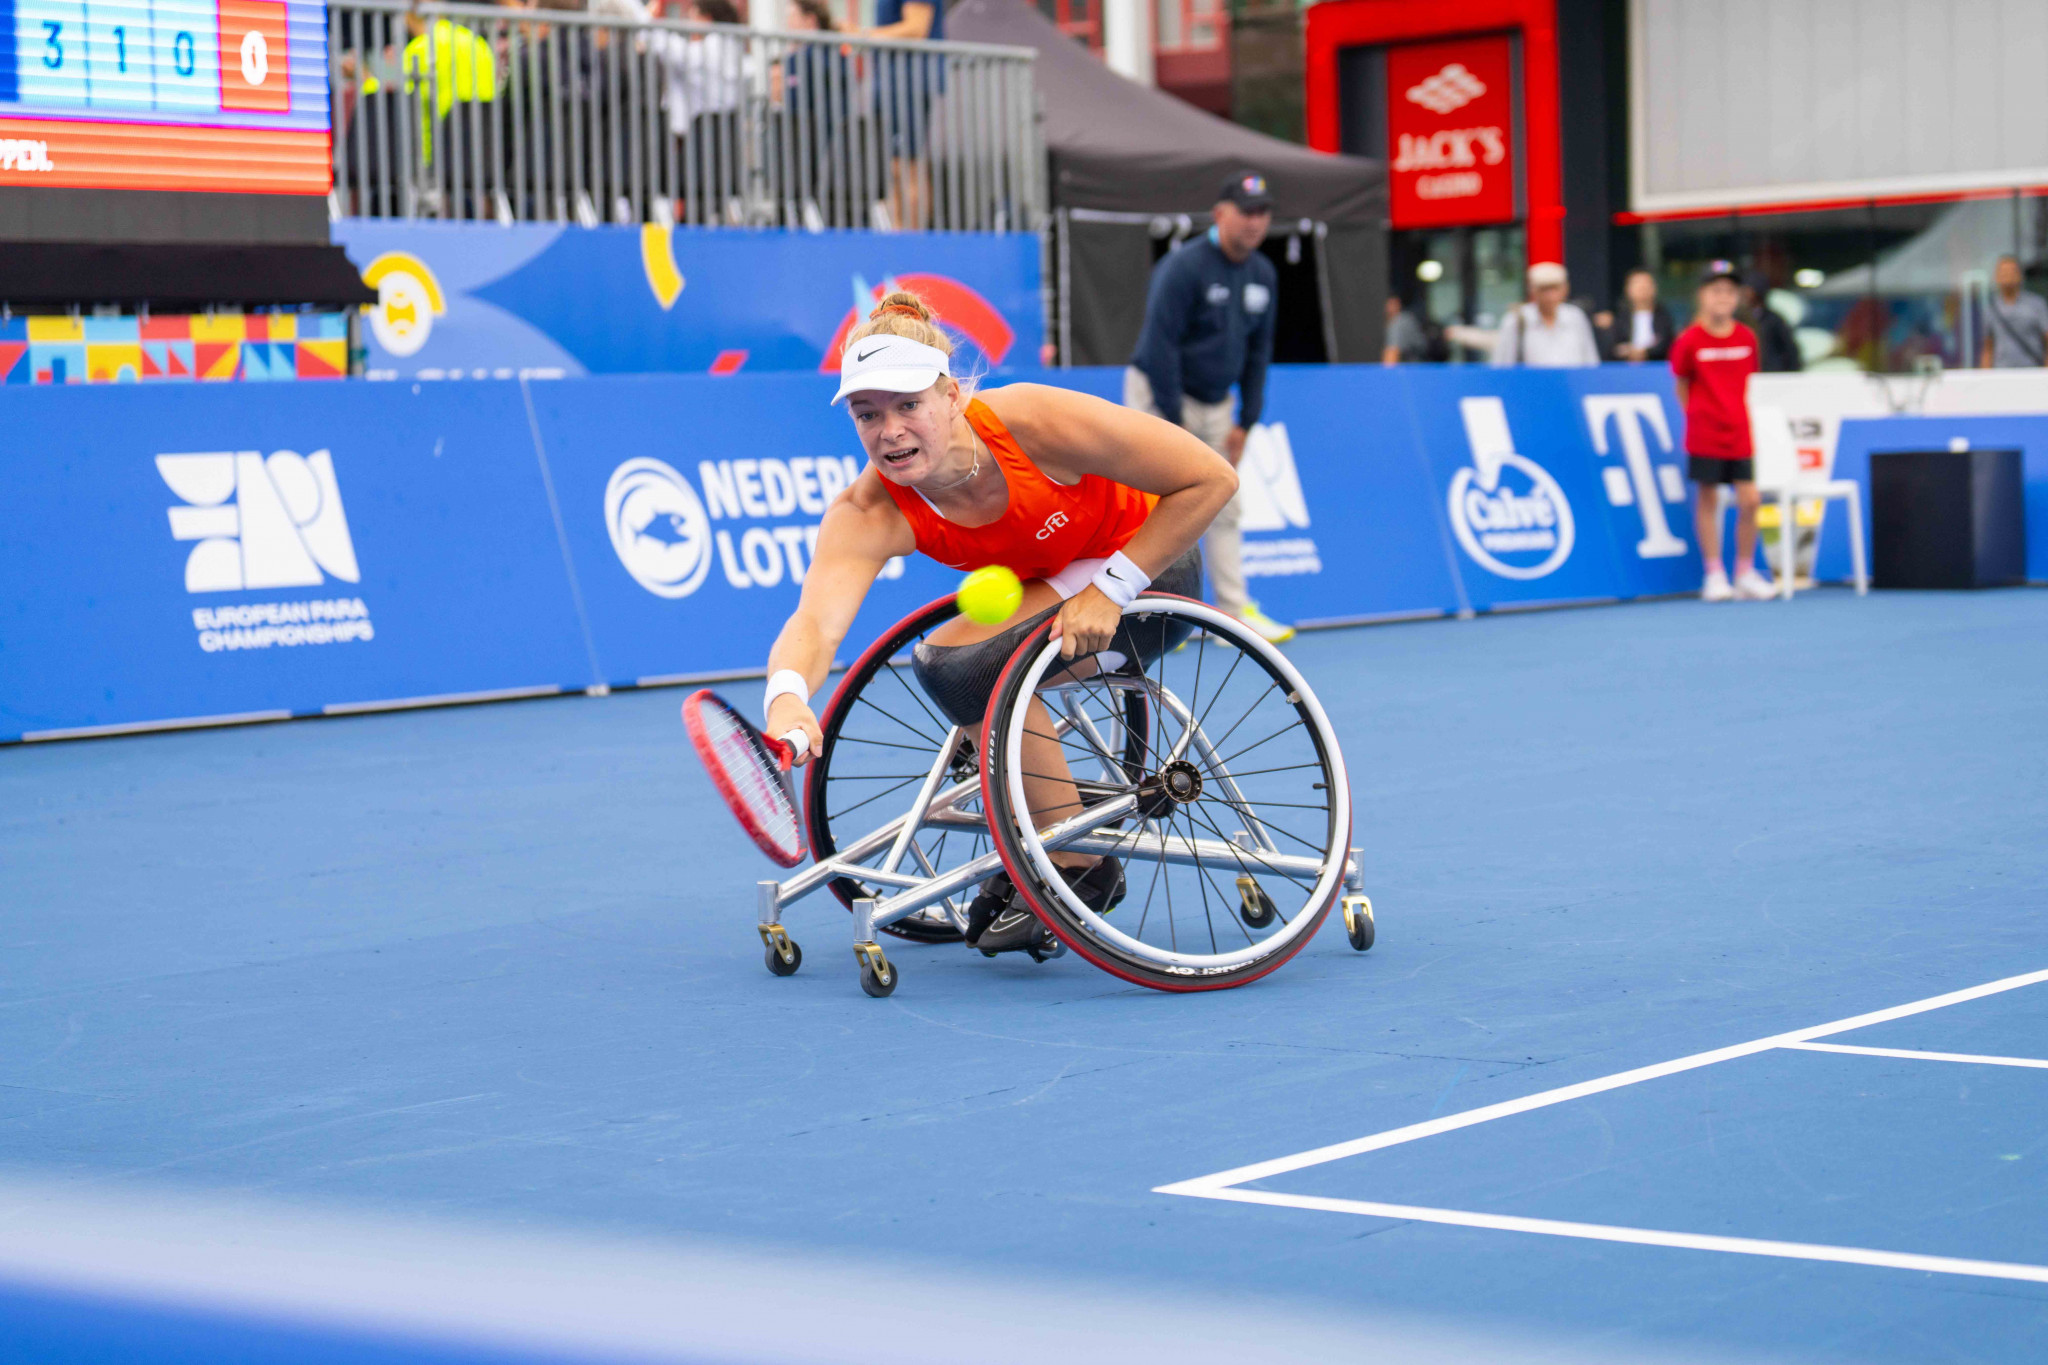 Diede de Groot captured the women's singles and doubles titles in Rotterdam ©EPC